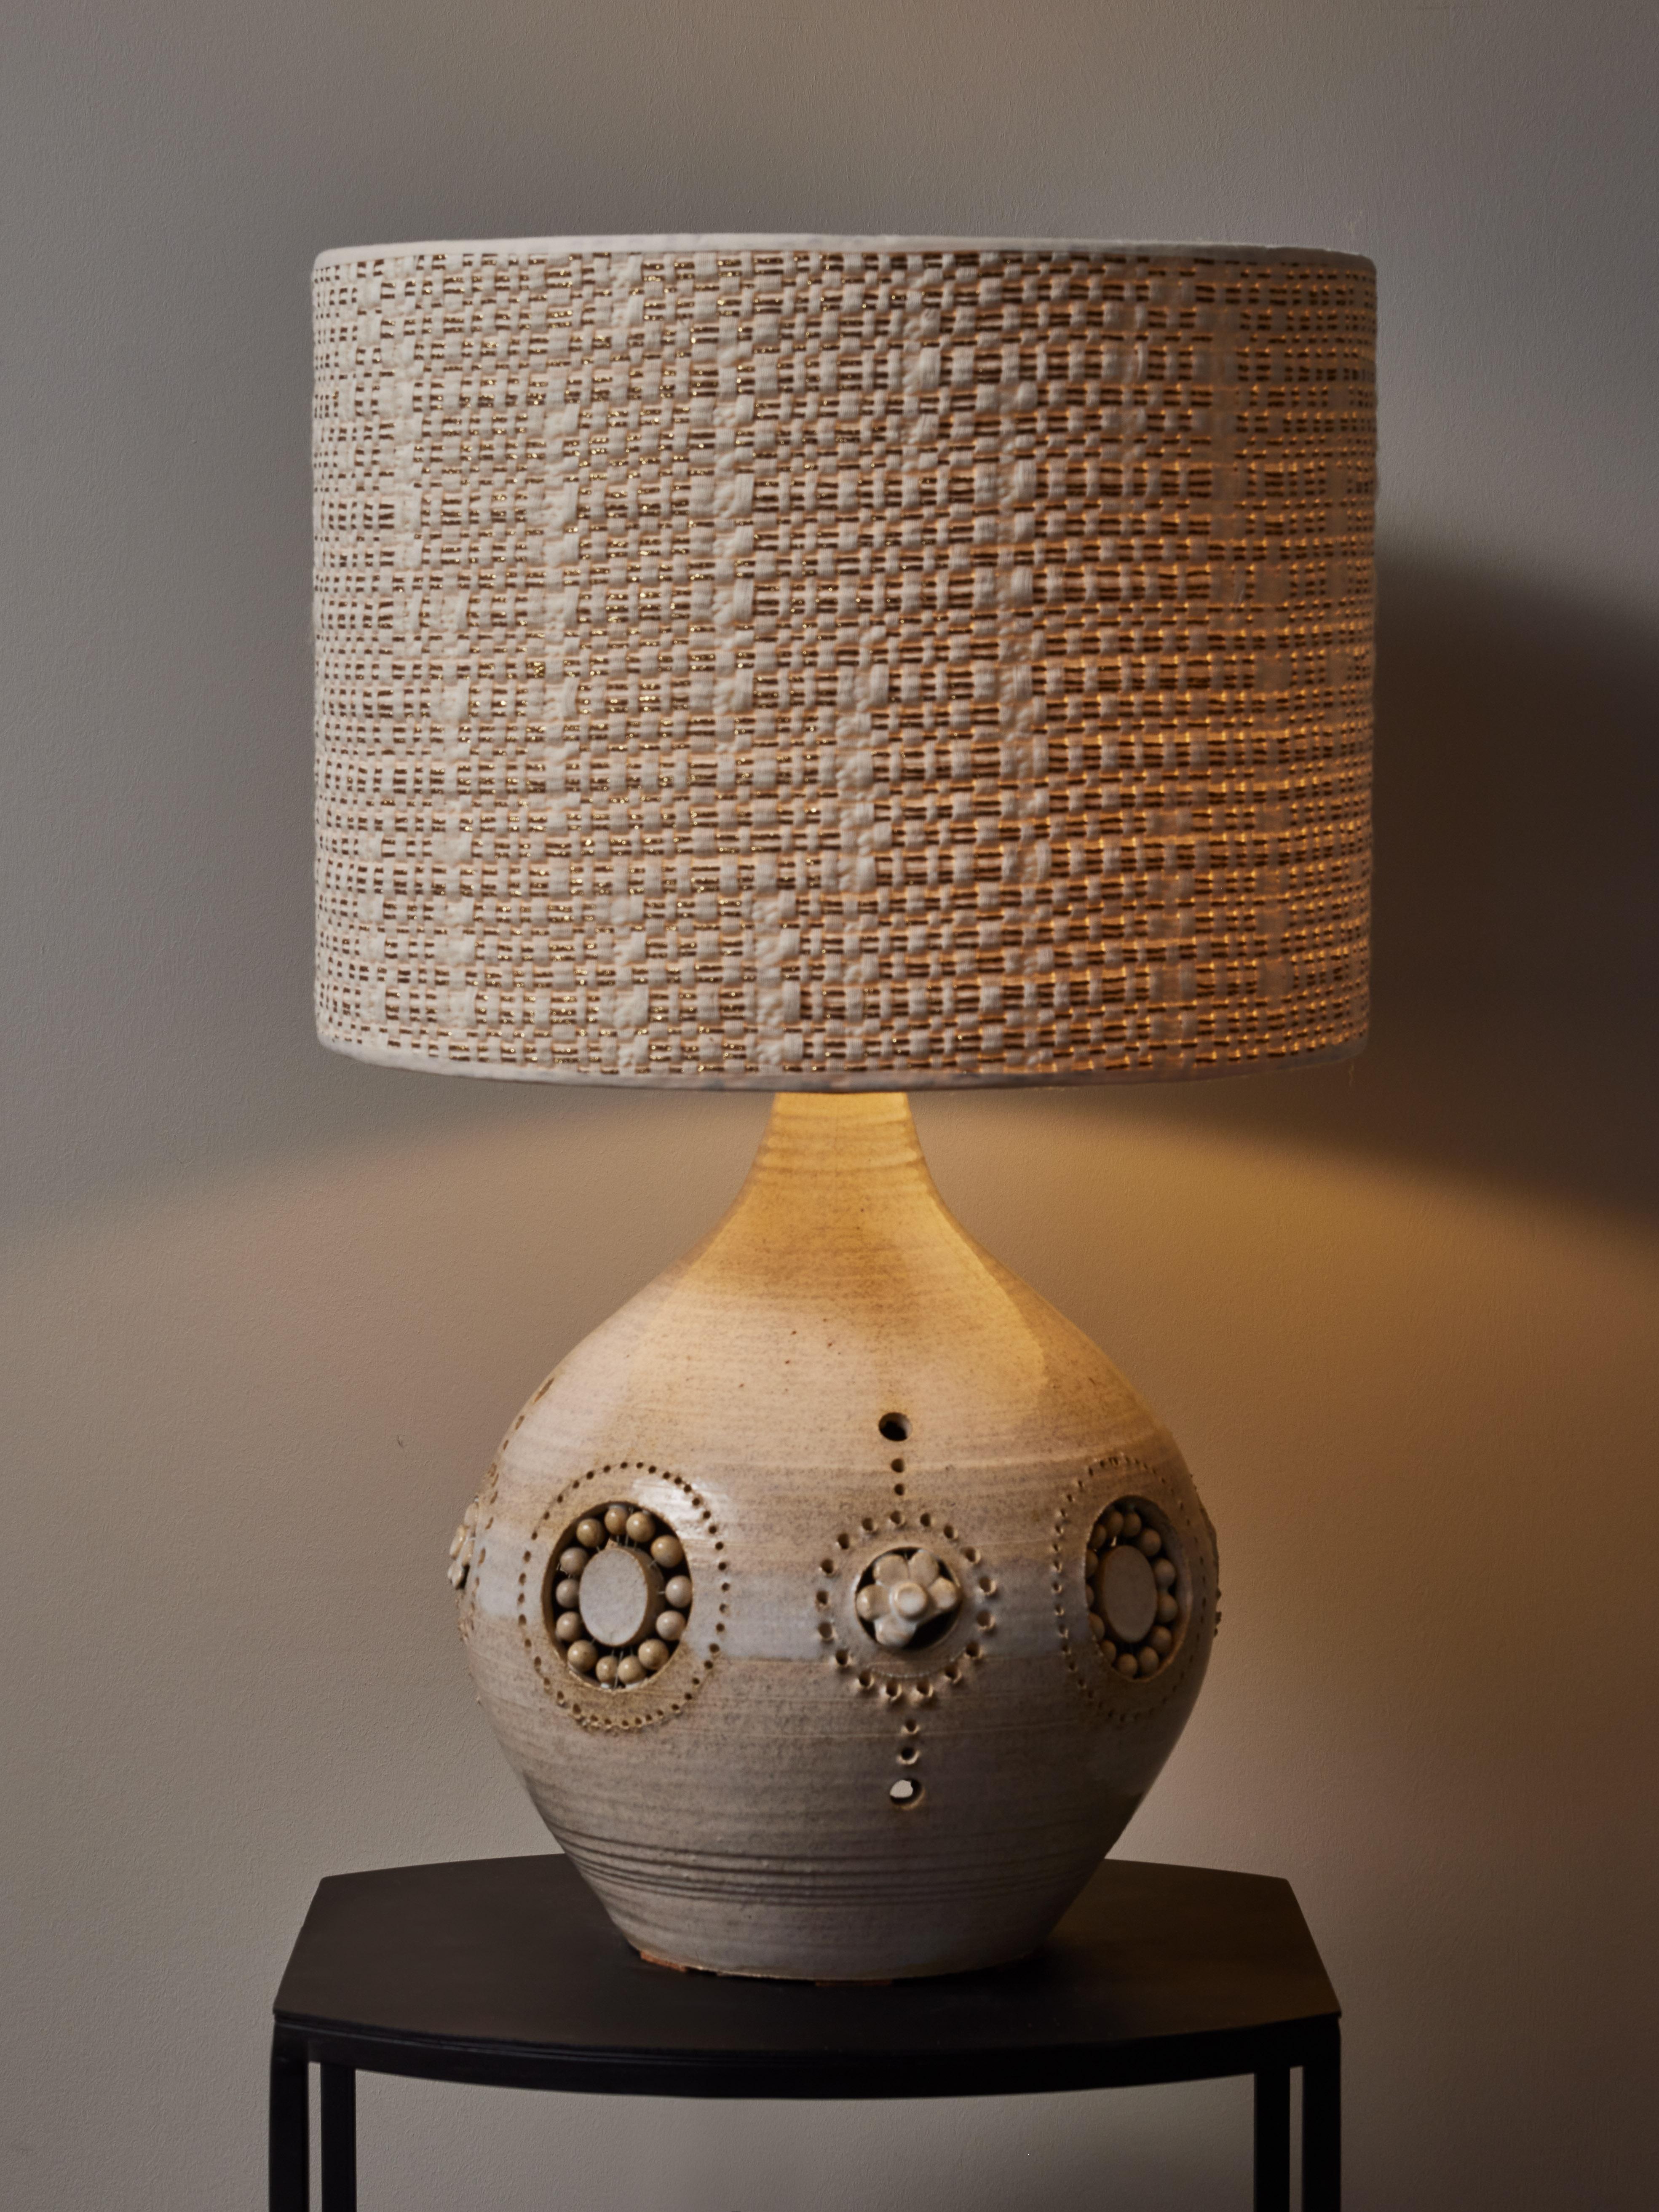 Ceramic table lamps made by Georges Pelletier, uniform glaze with flower decors.

Georges Pelletier
Born in 1938 in Brussels, Belgium, Georges Pelletier is a ceramist who lives and works in Cannes, France. His ceramics are highly sought by art